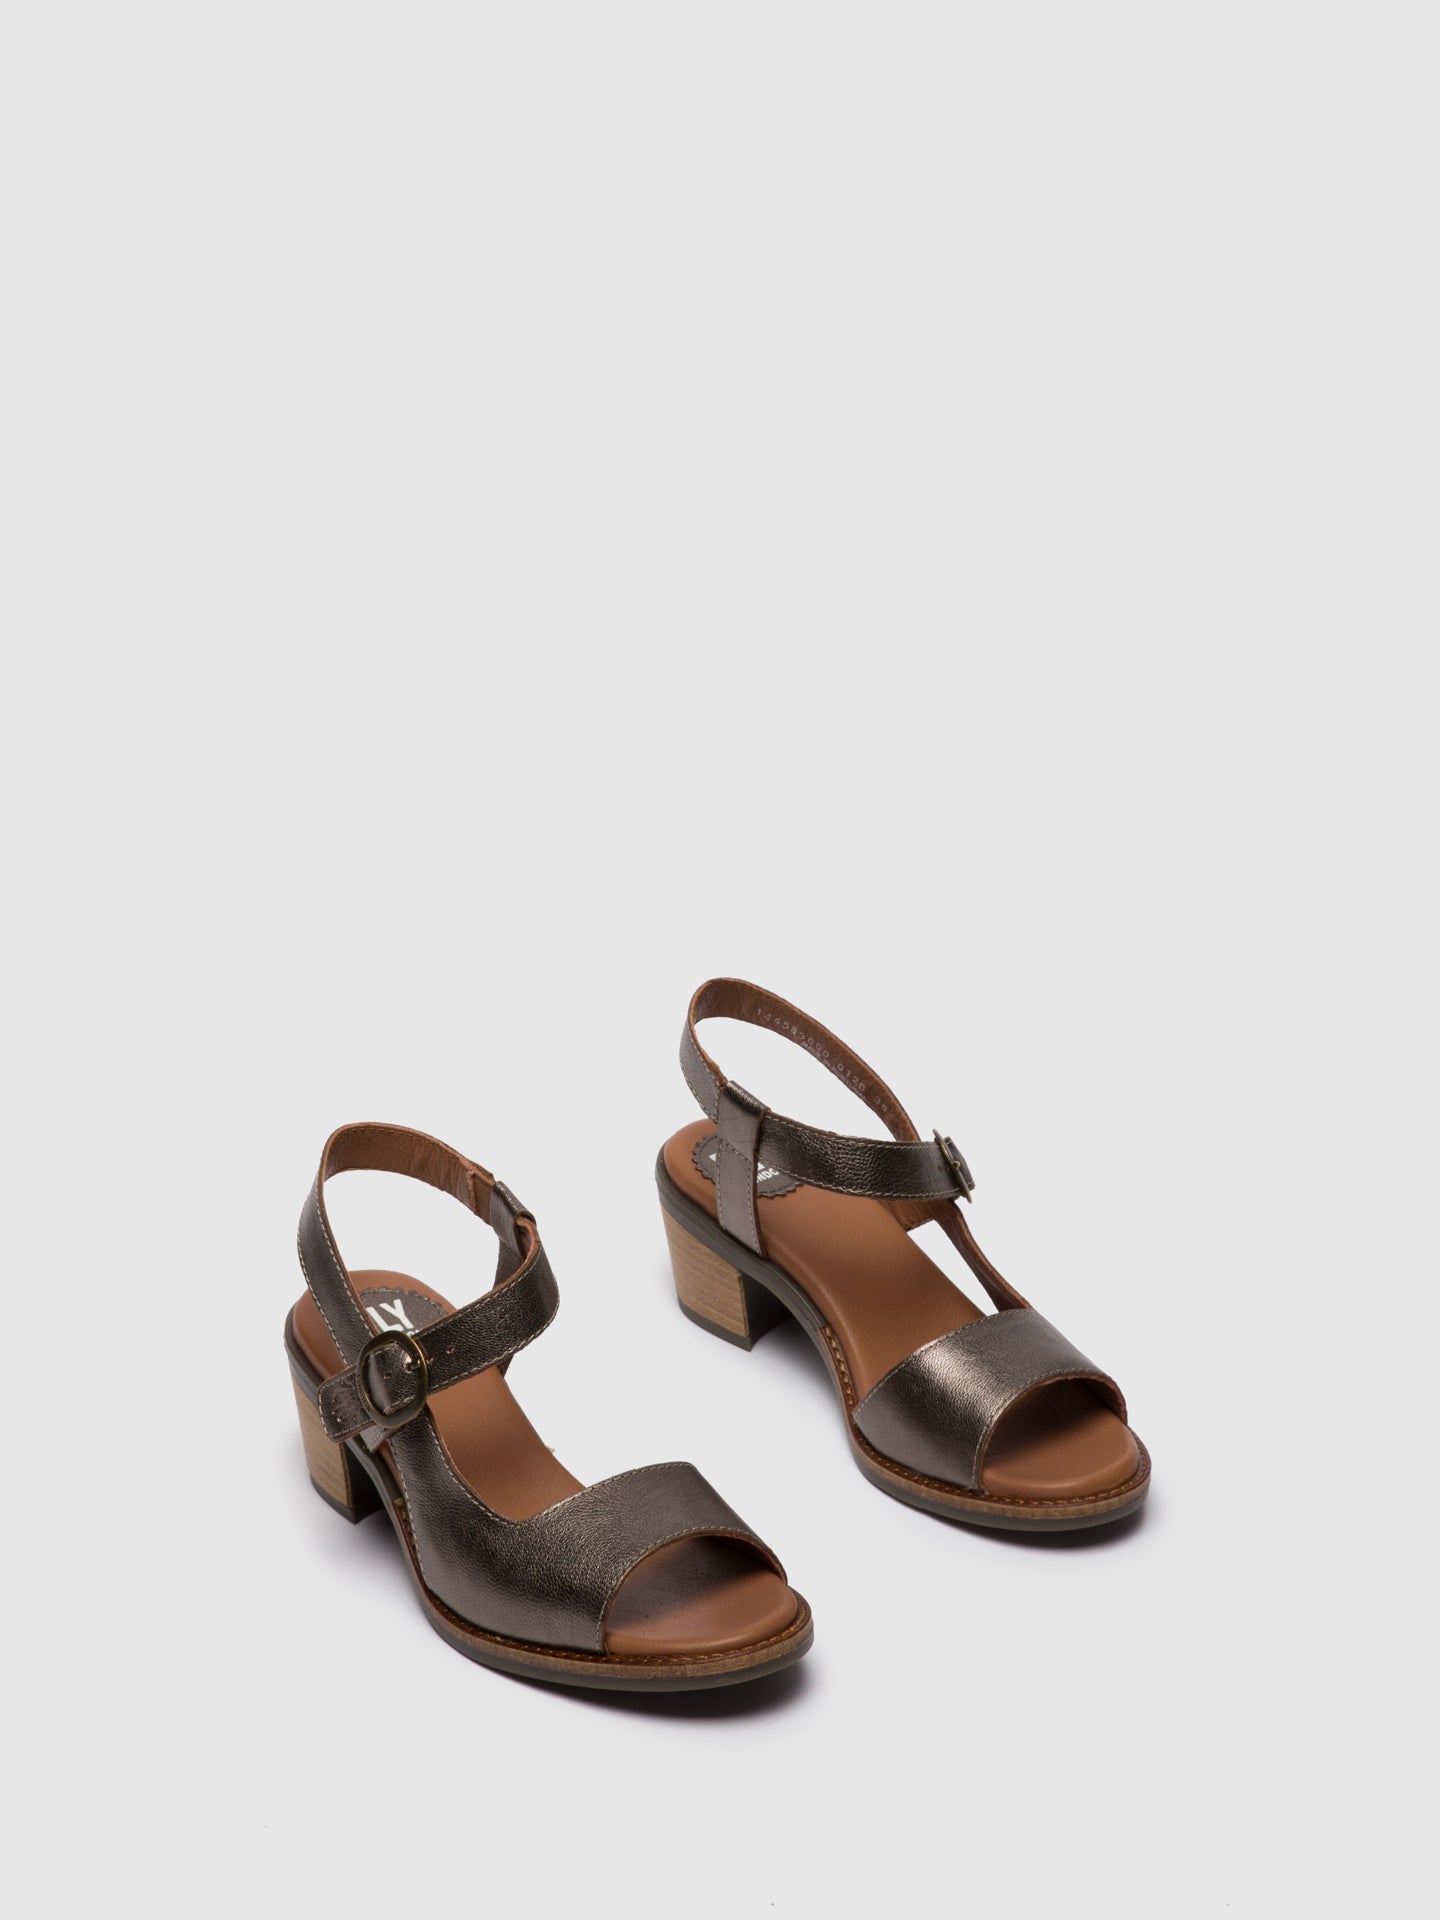 Fly London DarkGray Buckle Sandals